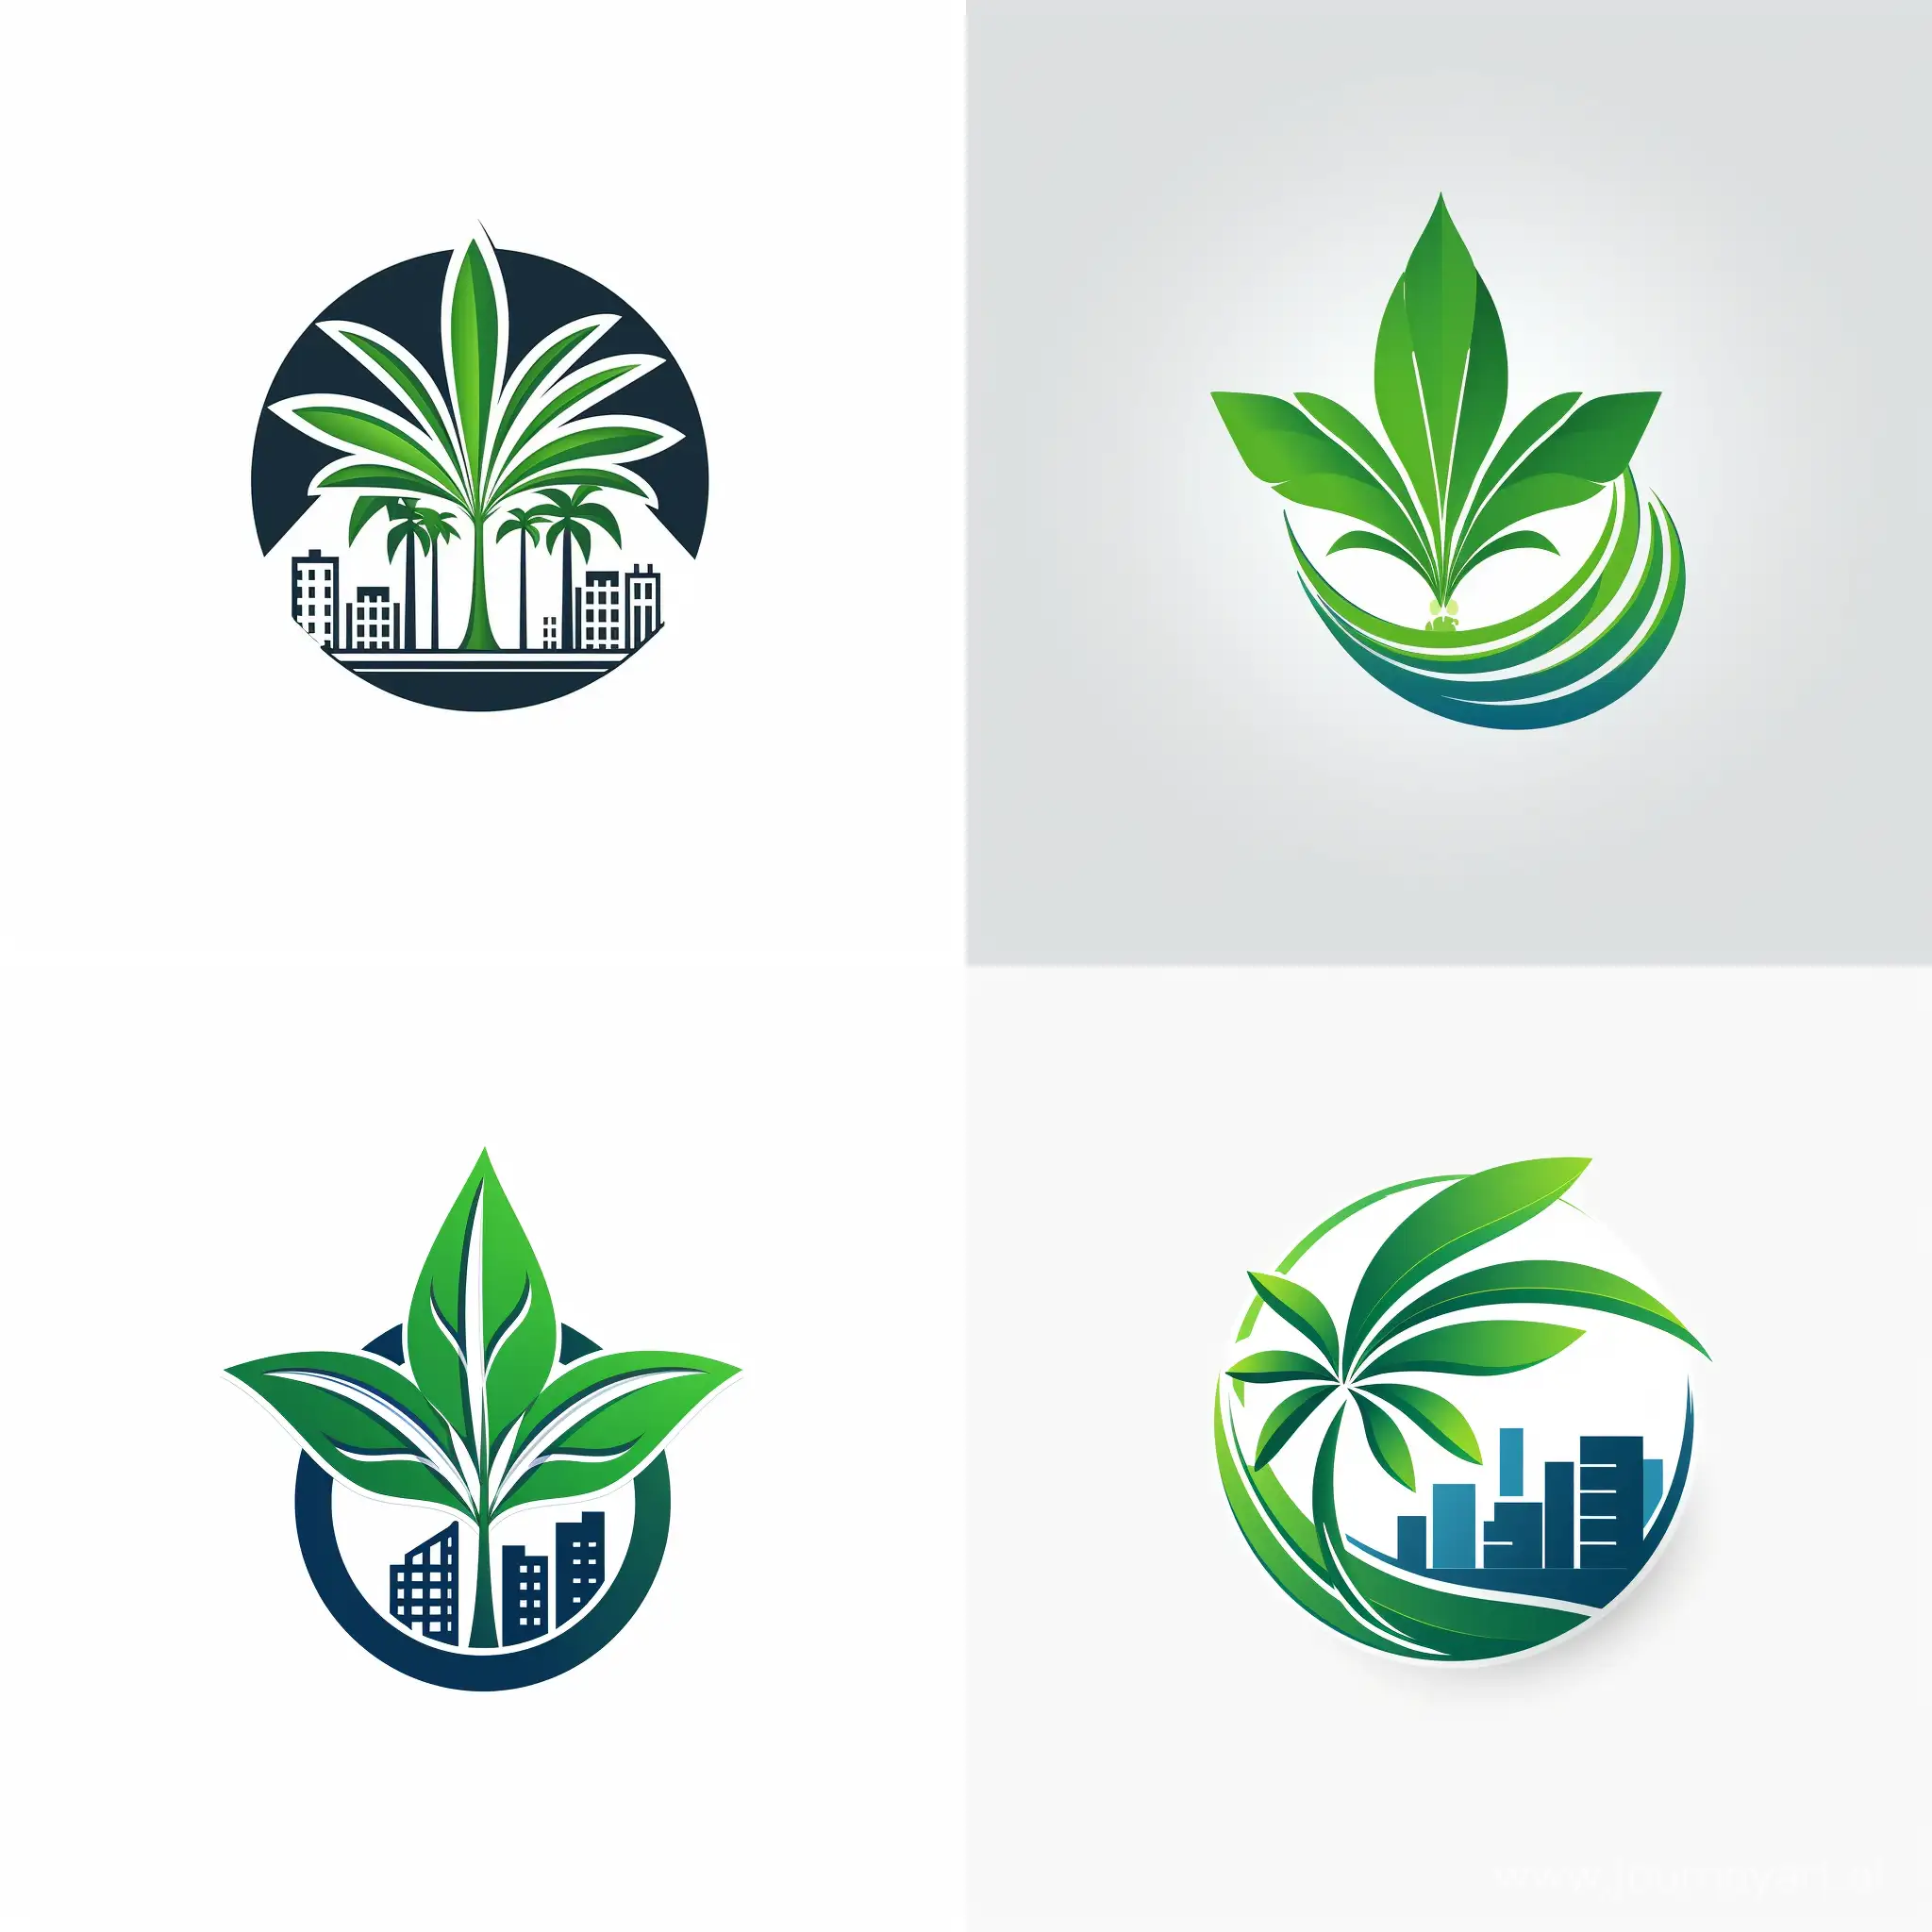 Design a logo as a symbol for a smart and green city, incorporating an octagonal star to represent modernity and advancement. Utilize a combination of a leaf and a palm tree to integrate green and sustainable elements, reflecting the smart and eco-friendly nature of the city. Ensure that the logo conveys a sense of technological innovation while transforming it into a symbol of a vibrant and sustainable urban life